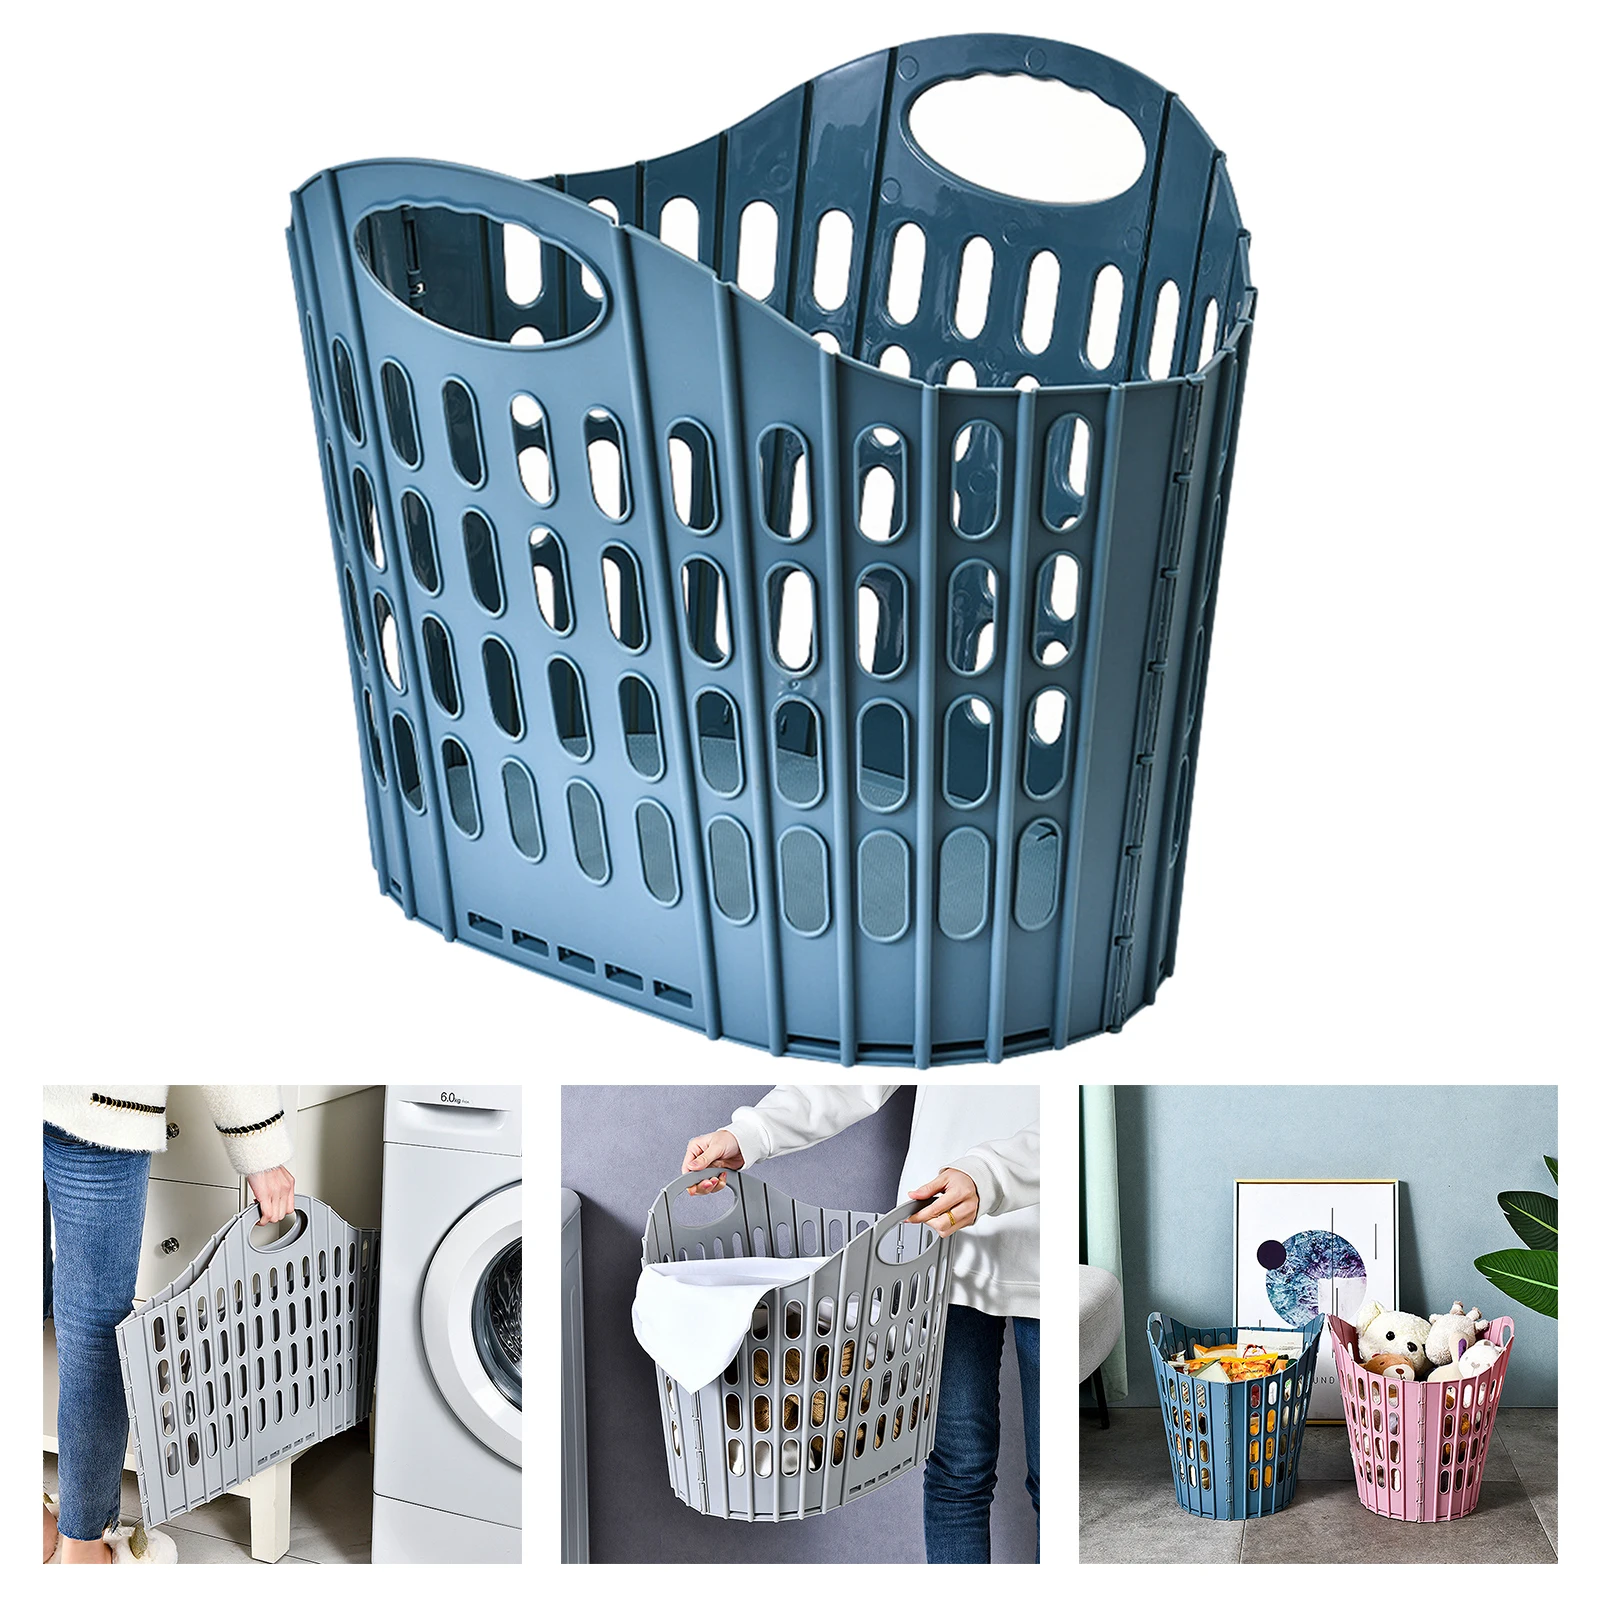 Collapsible Storage Bin for Bathroom,Toys and Clothing Organization Yawinhe 72L Laundry Basket Set of 2 with Rope Handle 40 * 30 * 60, Grey Foldable Laundry Hamper Clothes Hamper 